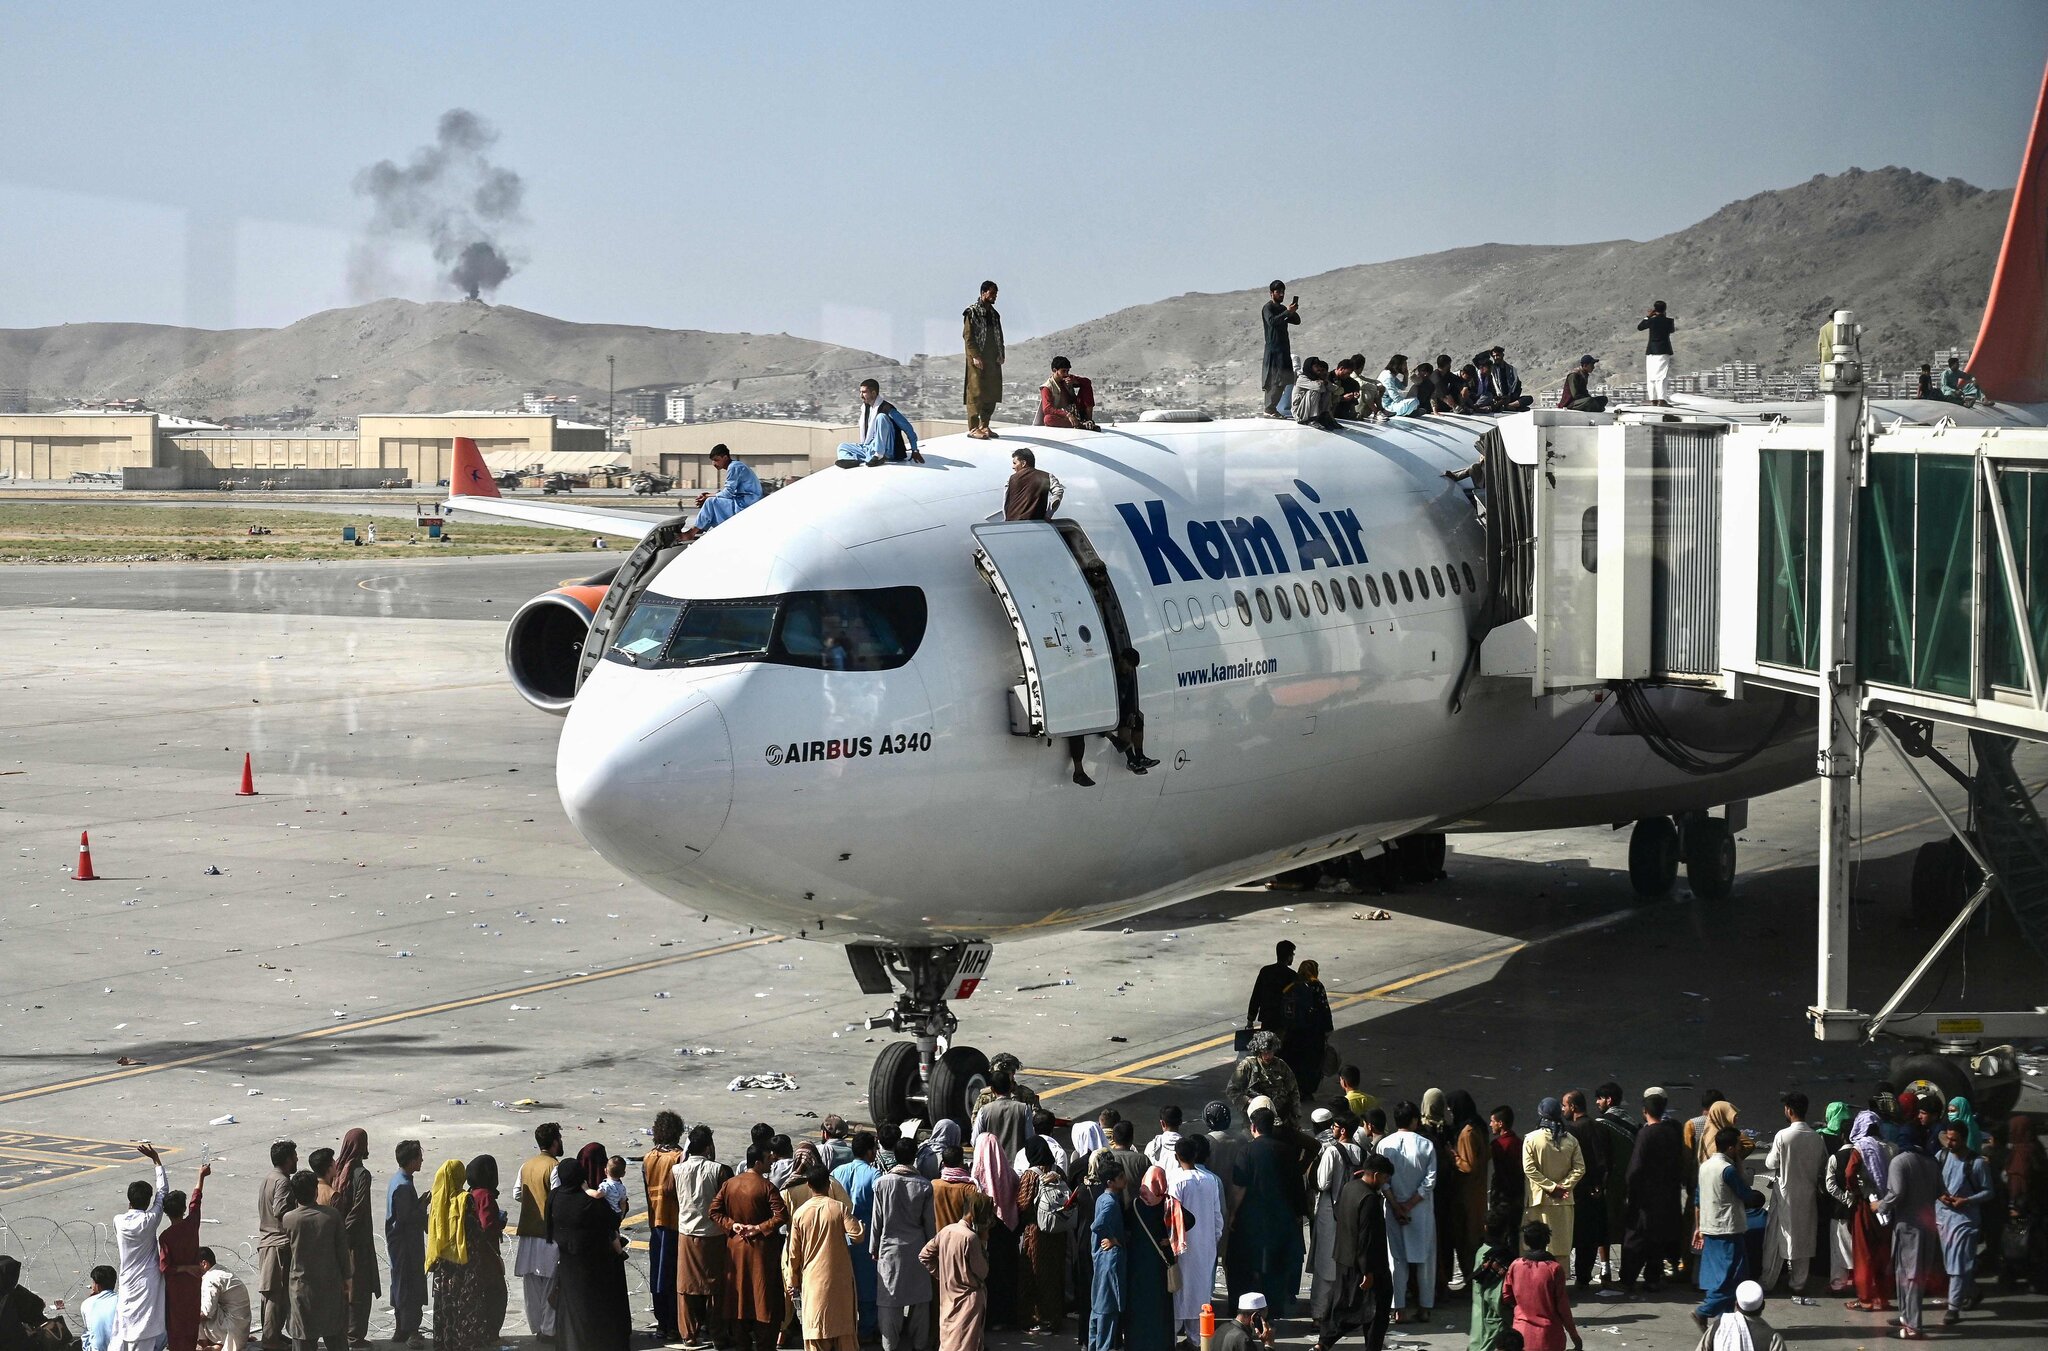 Taliban's reported violence adds urgency to visa program expansion (Credits: The NY Times)